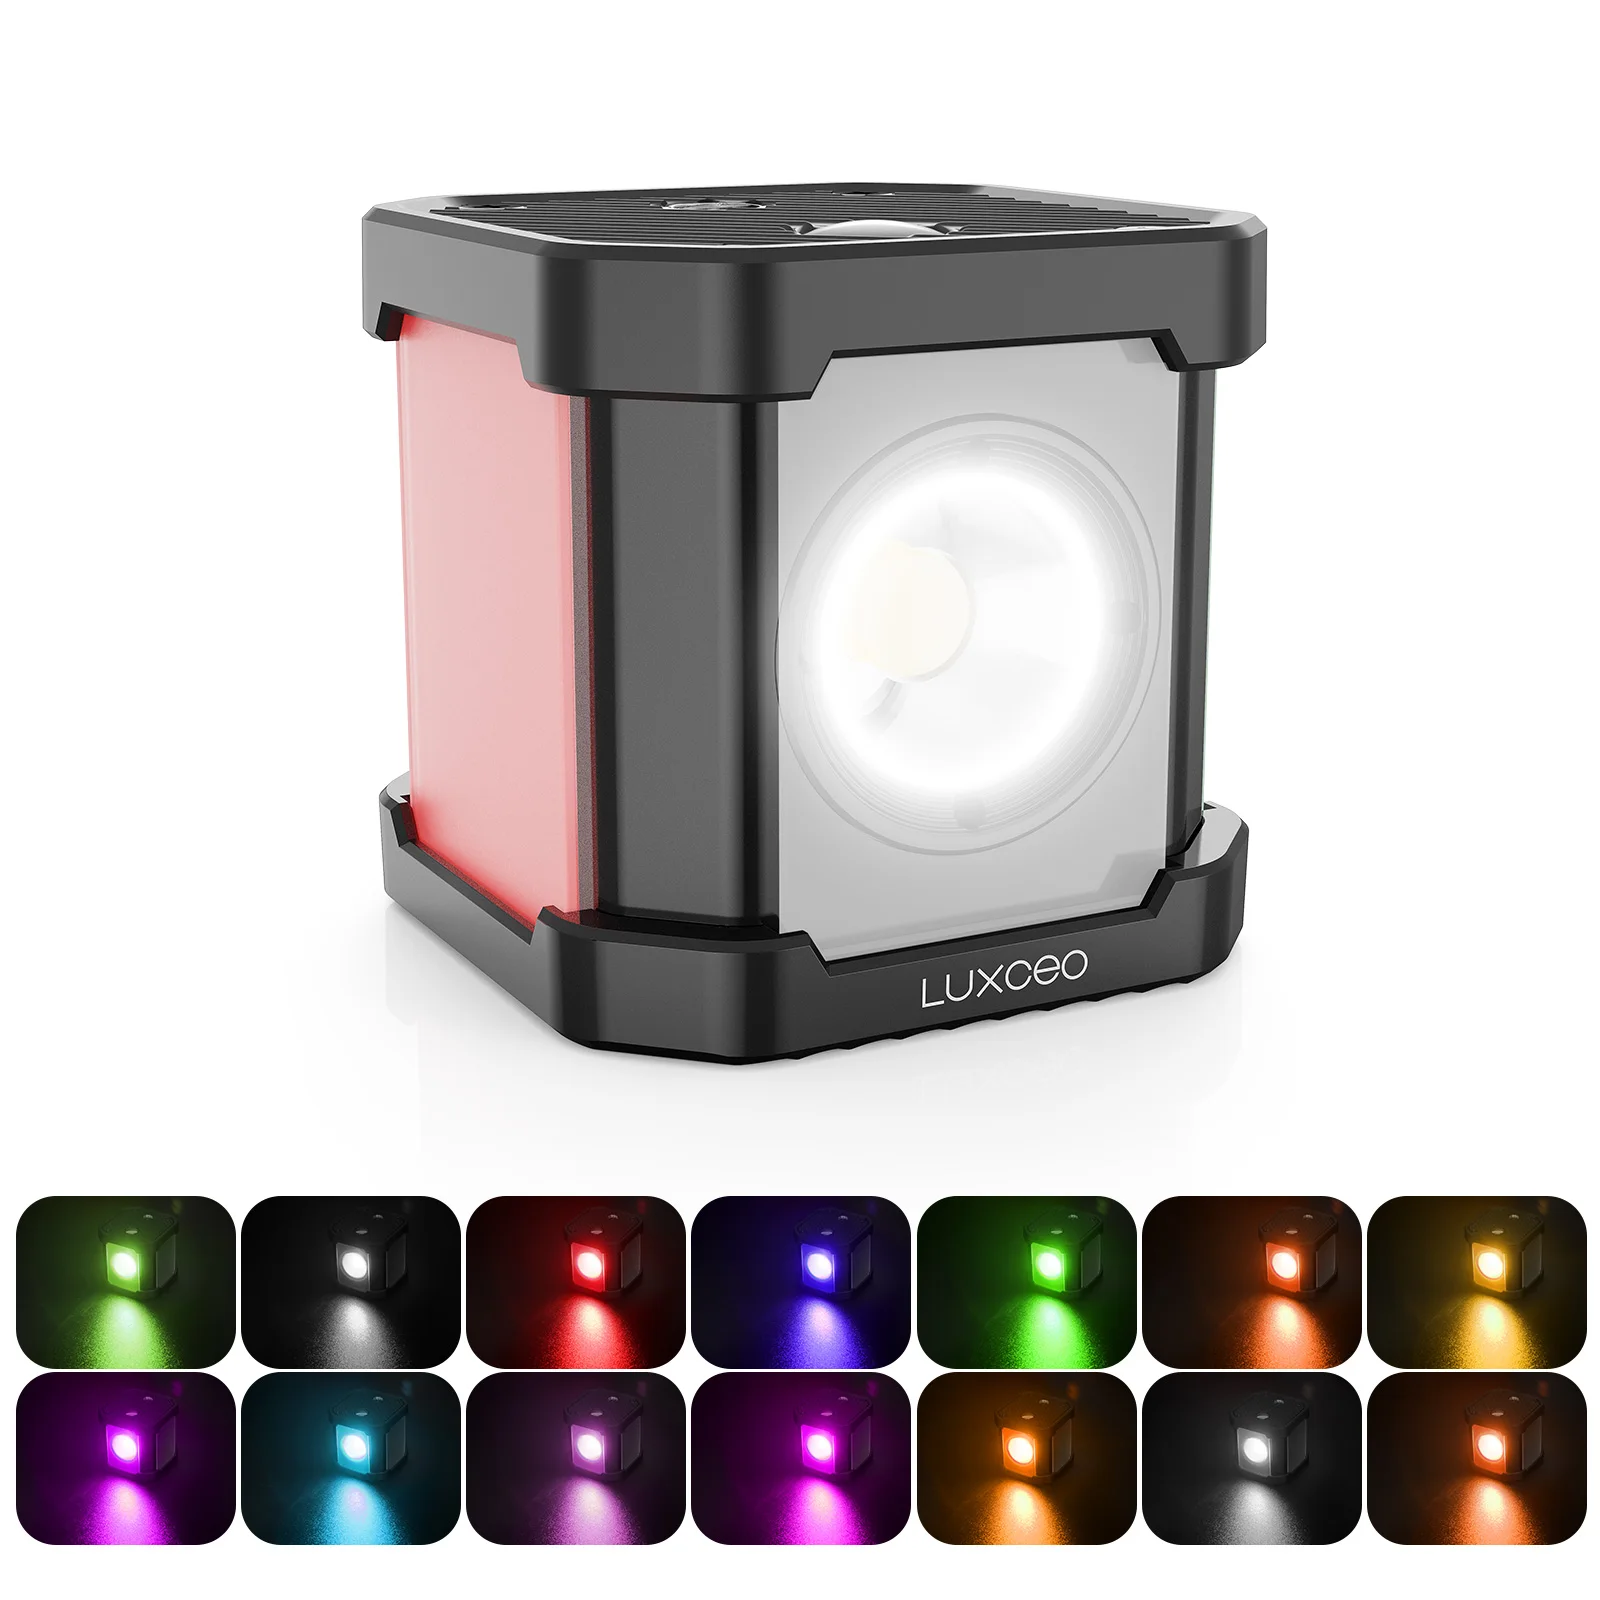 

luxceo P4 RGB Photography COB Video Light IP68 Underwater 30M Fill Light for GoPro Canon,Nikon,Sony SLR Camera